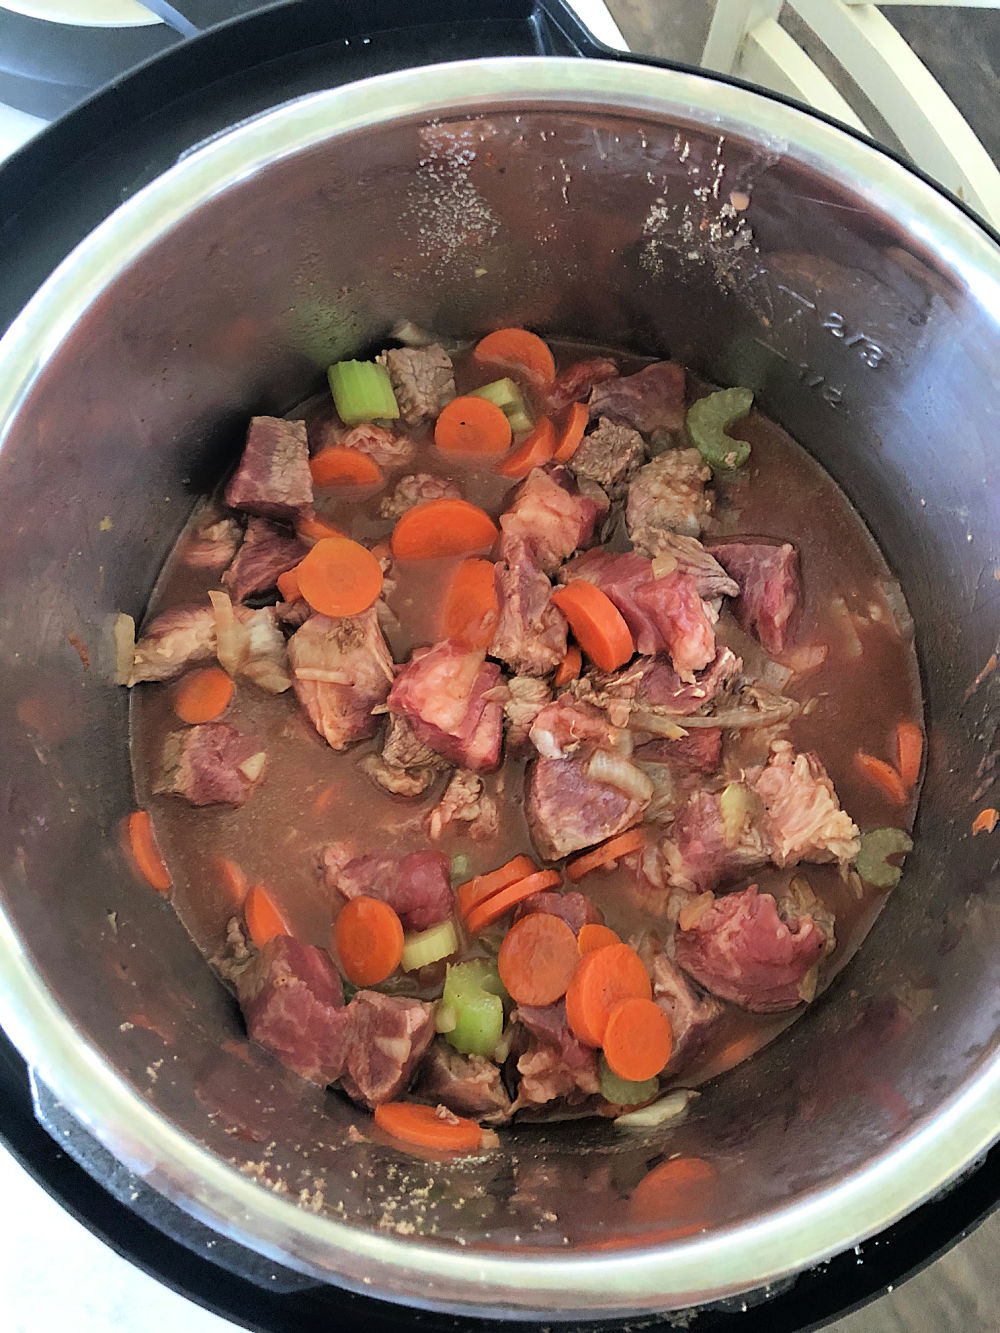 Beef added to the vegetables in Instant Pot